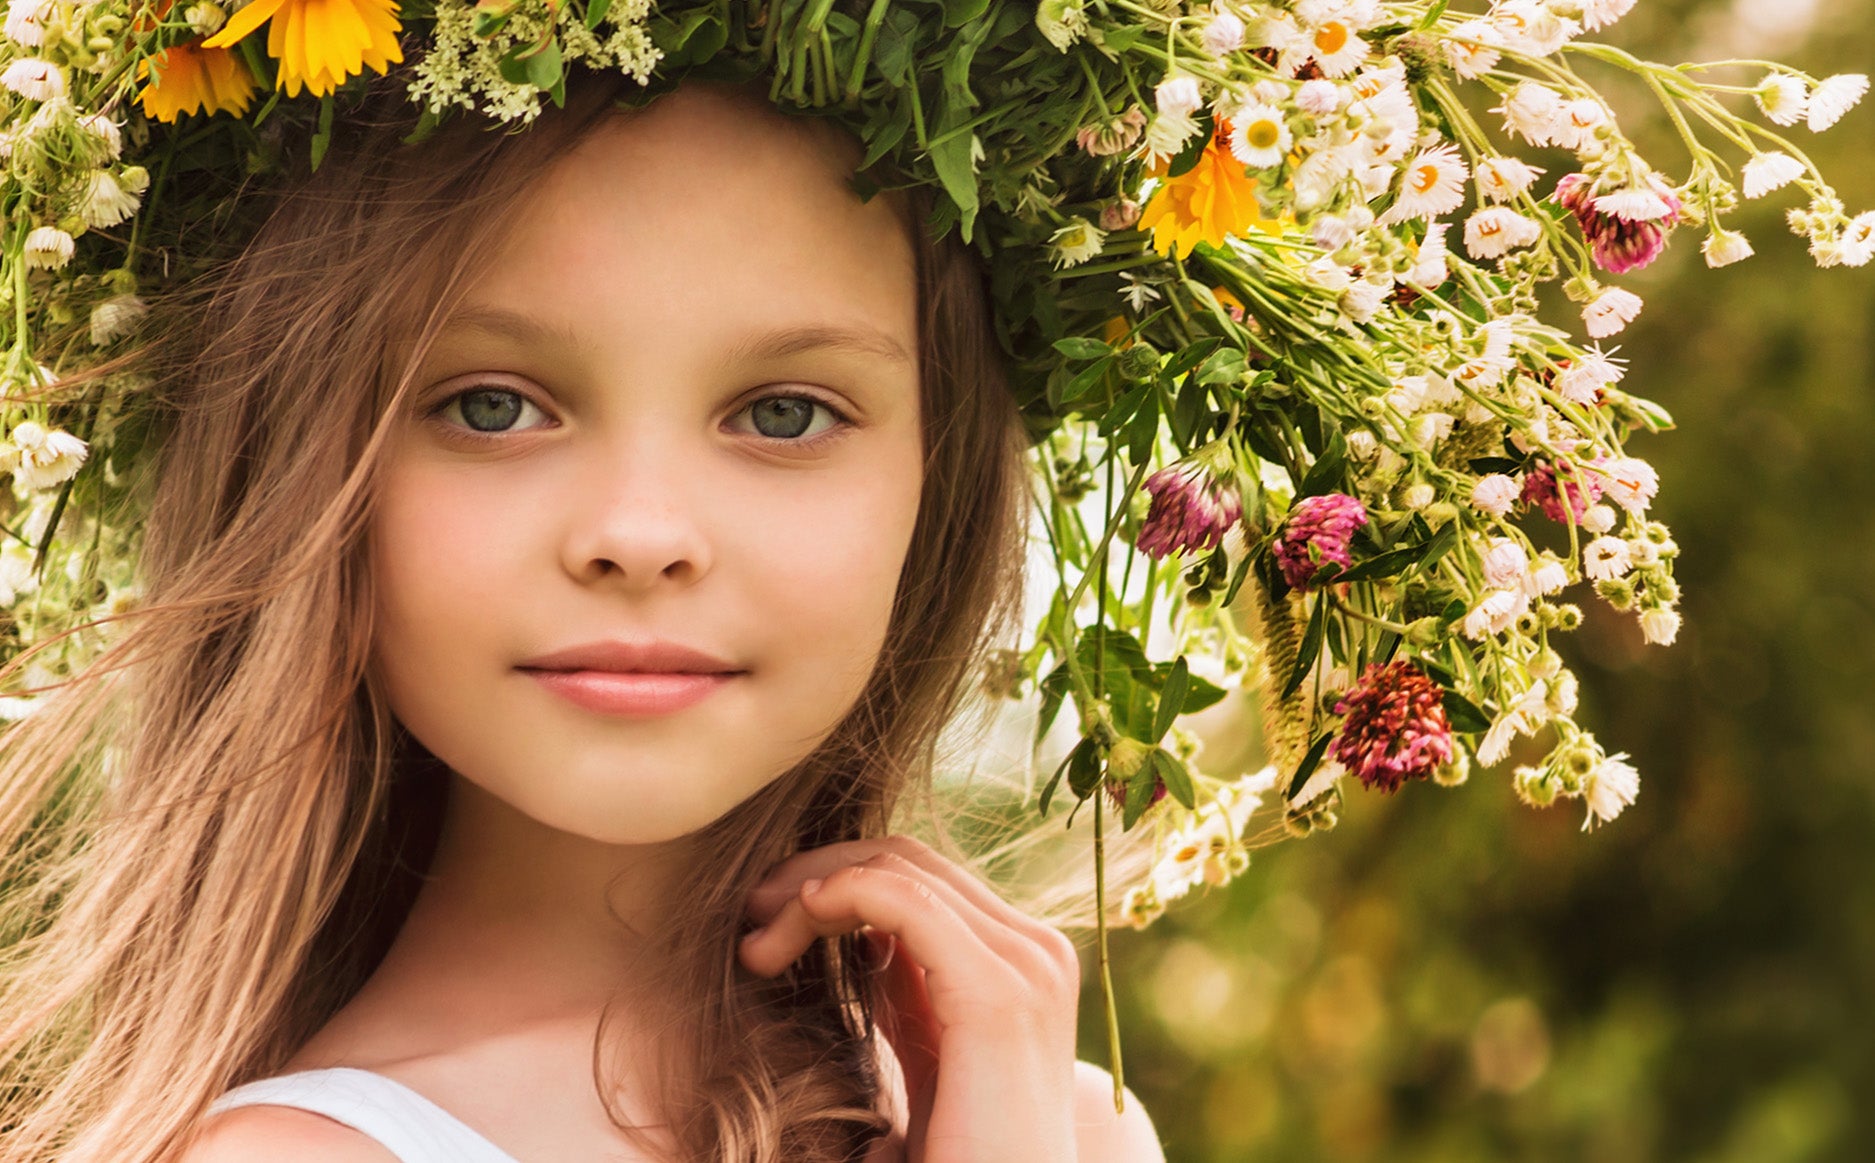 Phytonutrients shown to delay early puberty – Good For You Girls